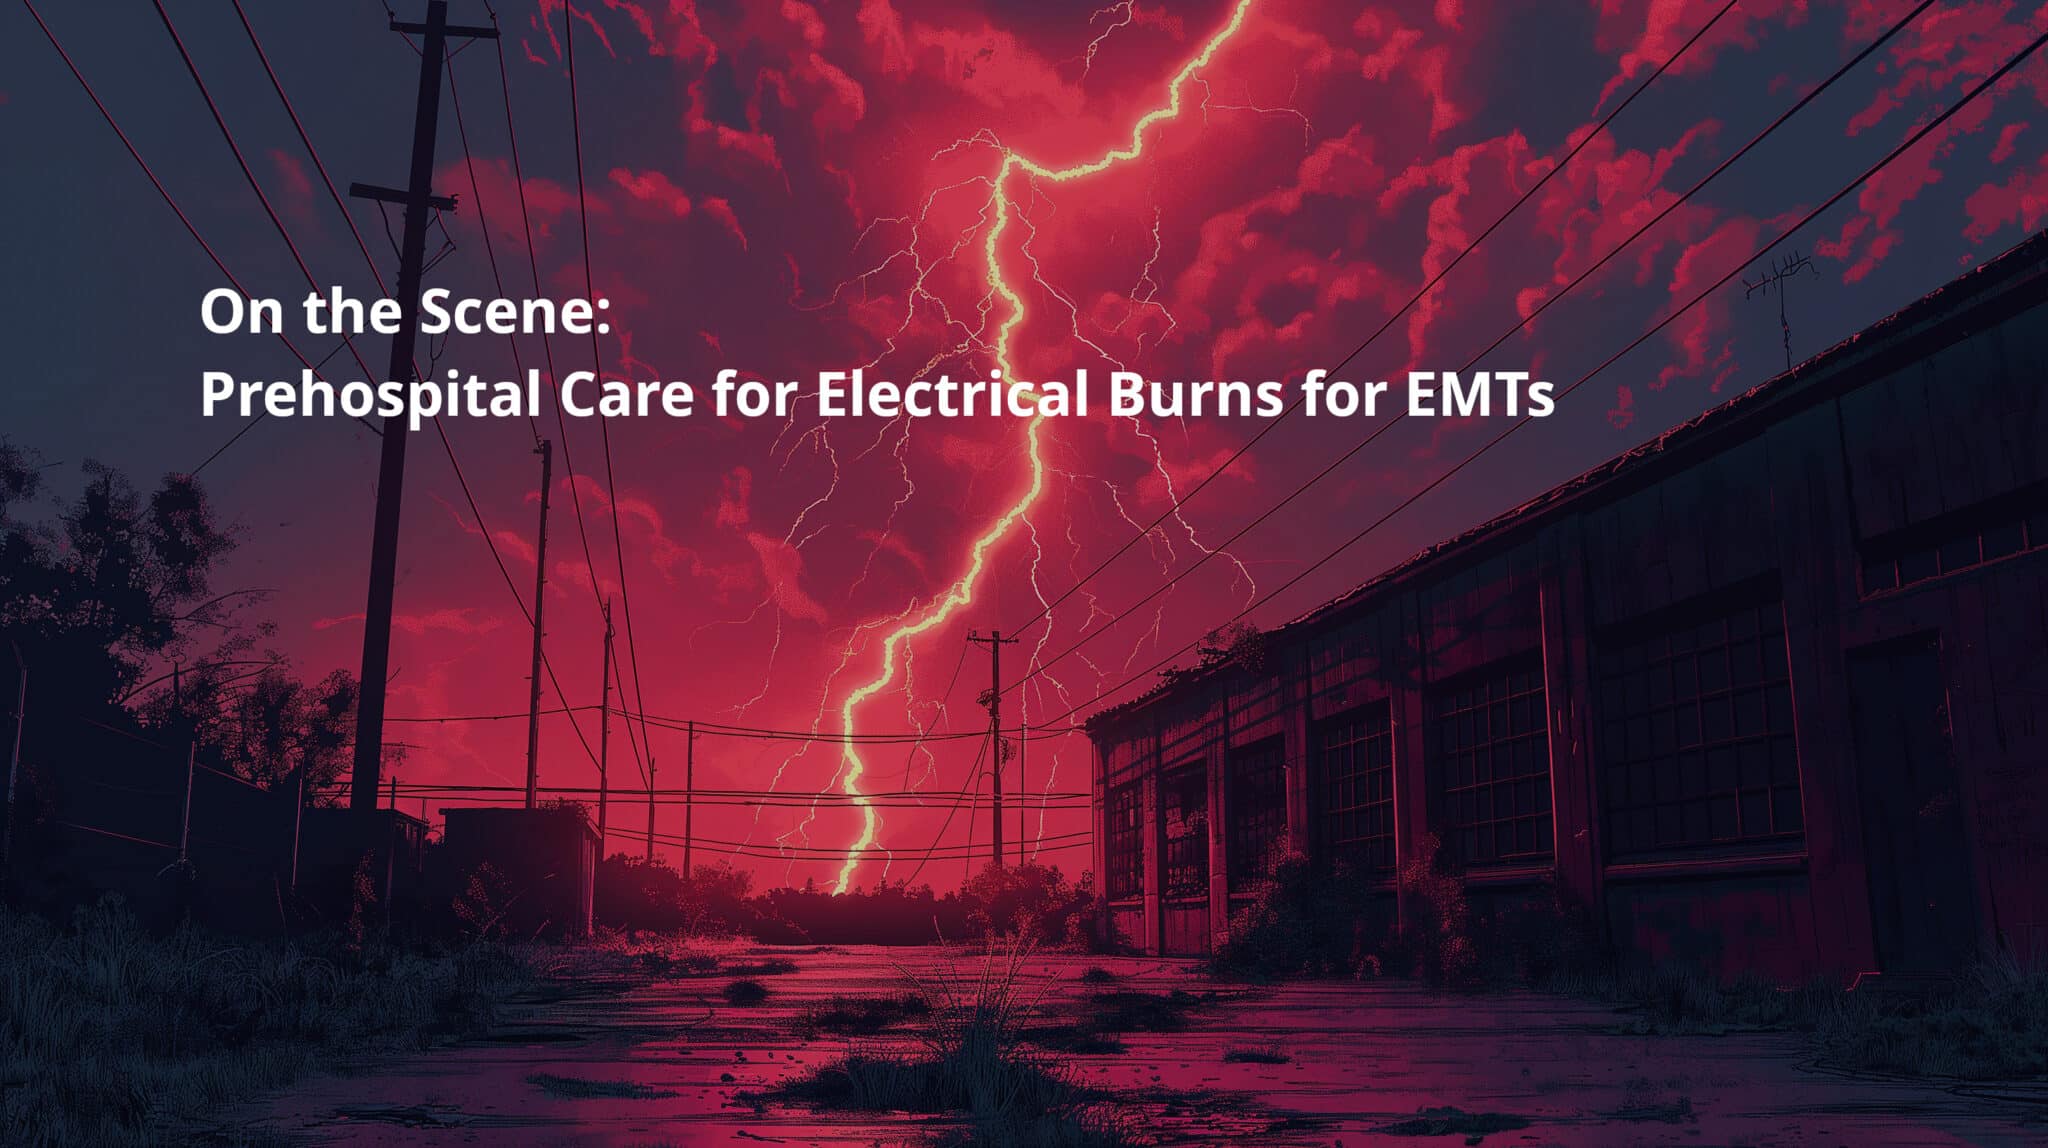 A lightning strike. Typical emergency situation for EMTs